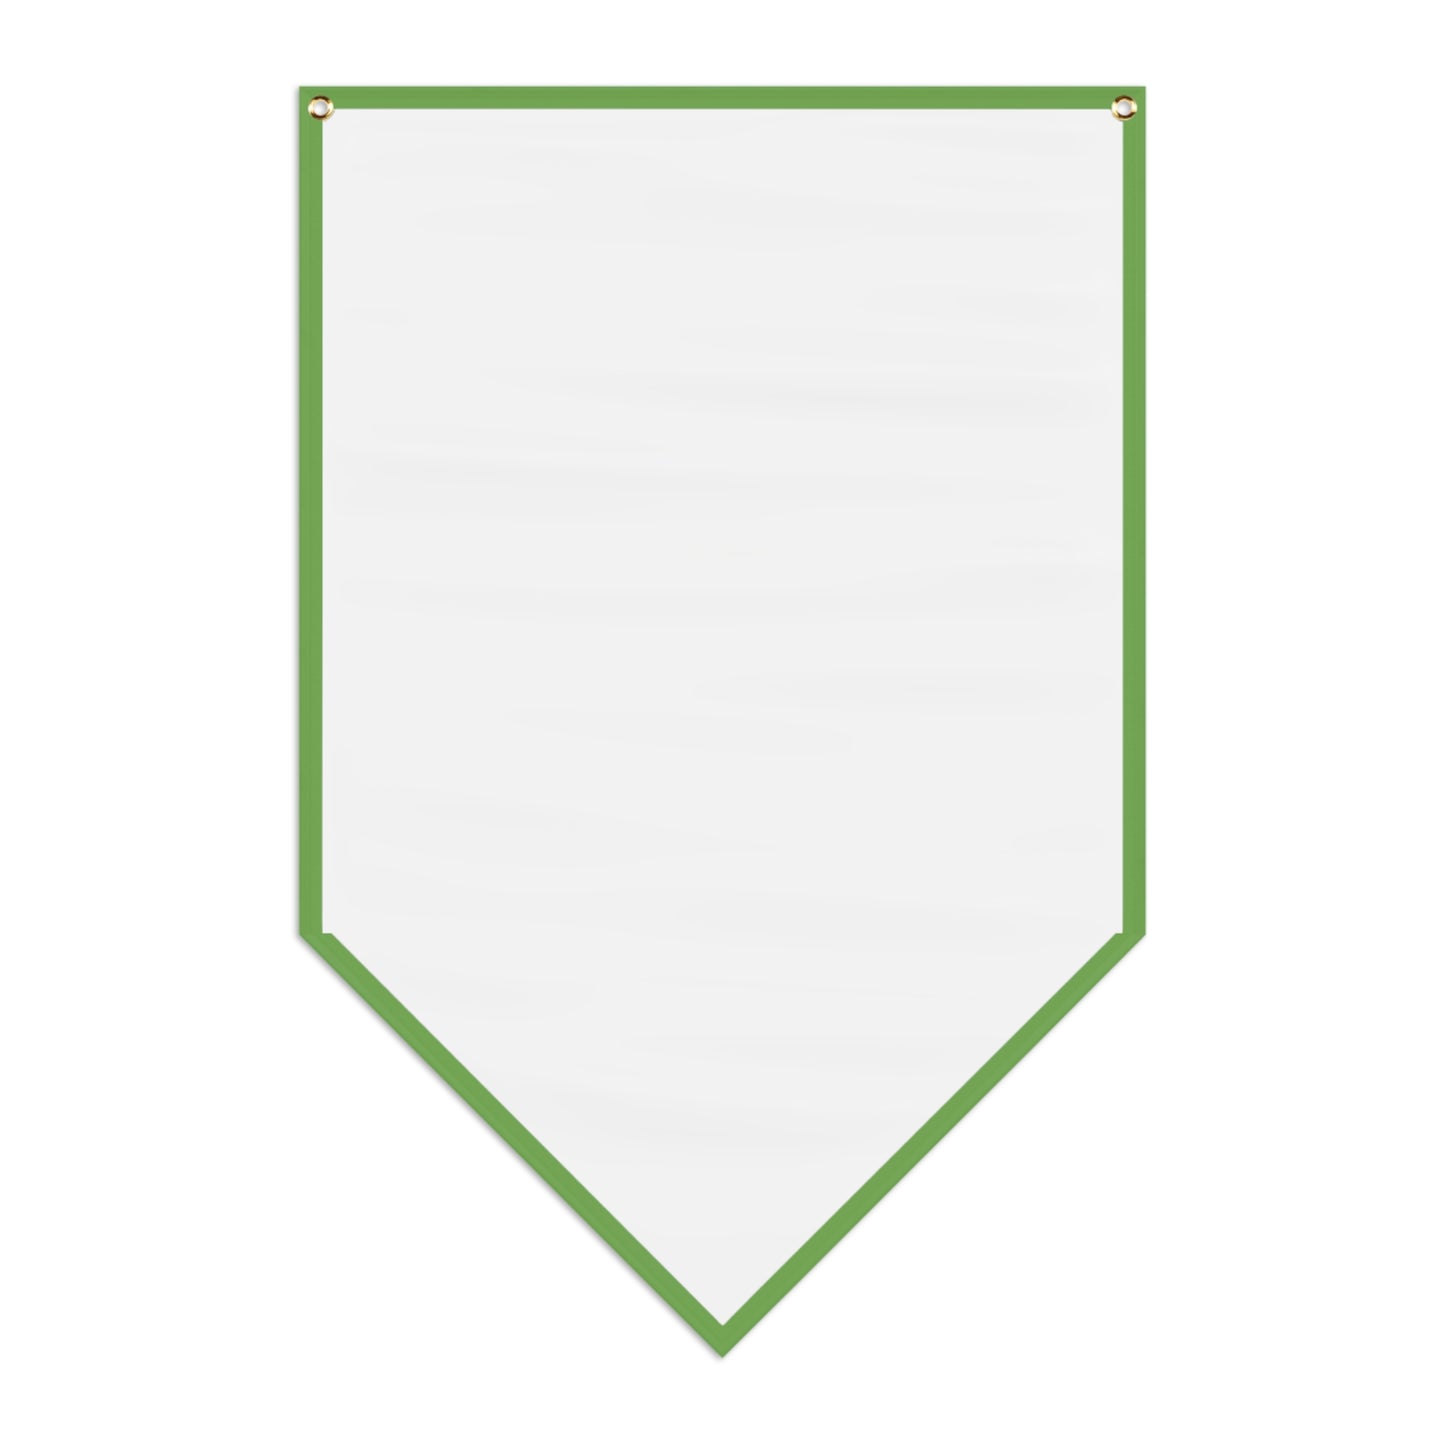 EVERGREEN DISC DOGS Pennant Banner